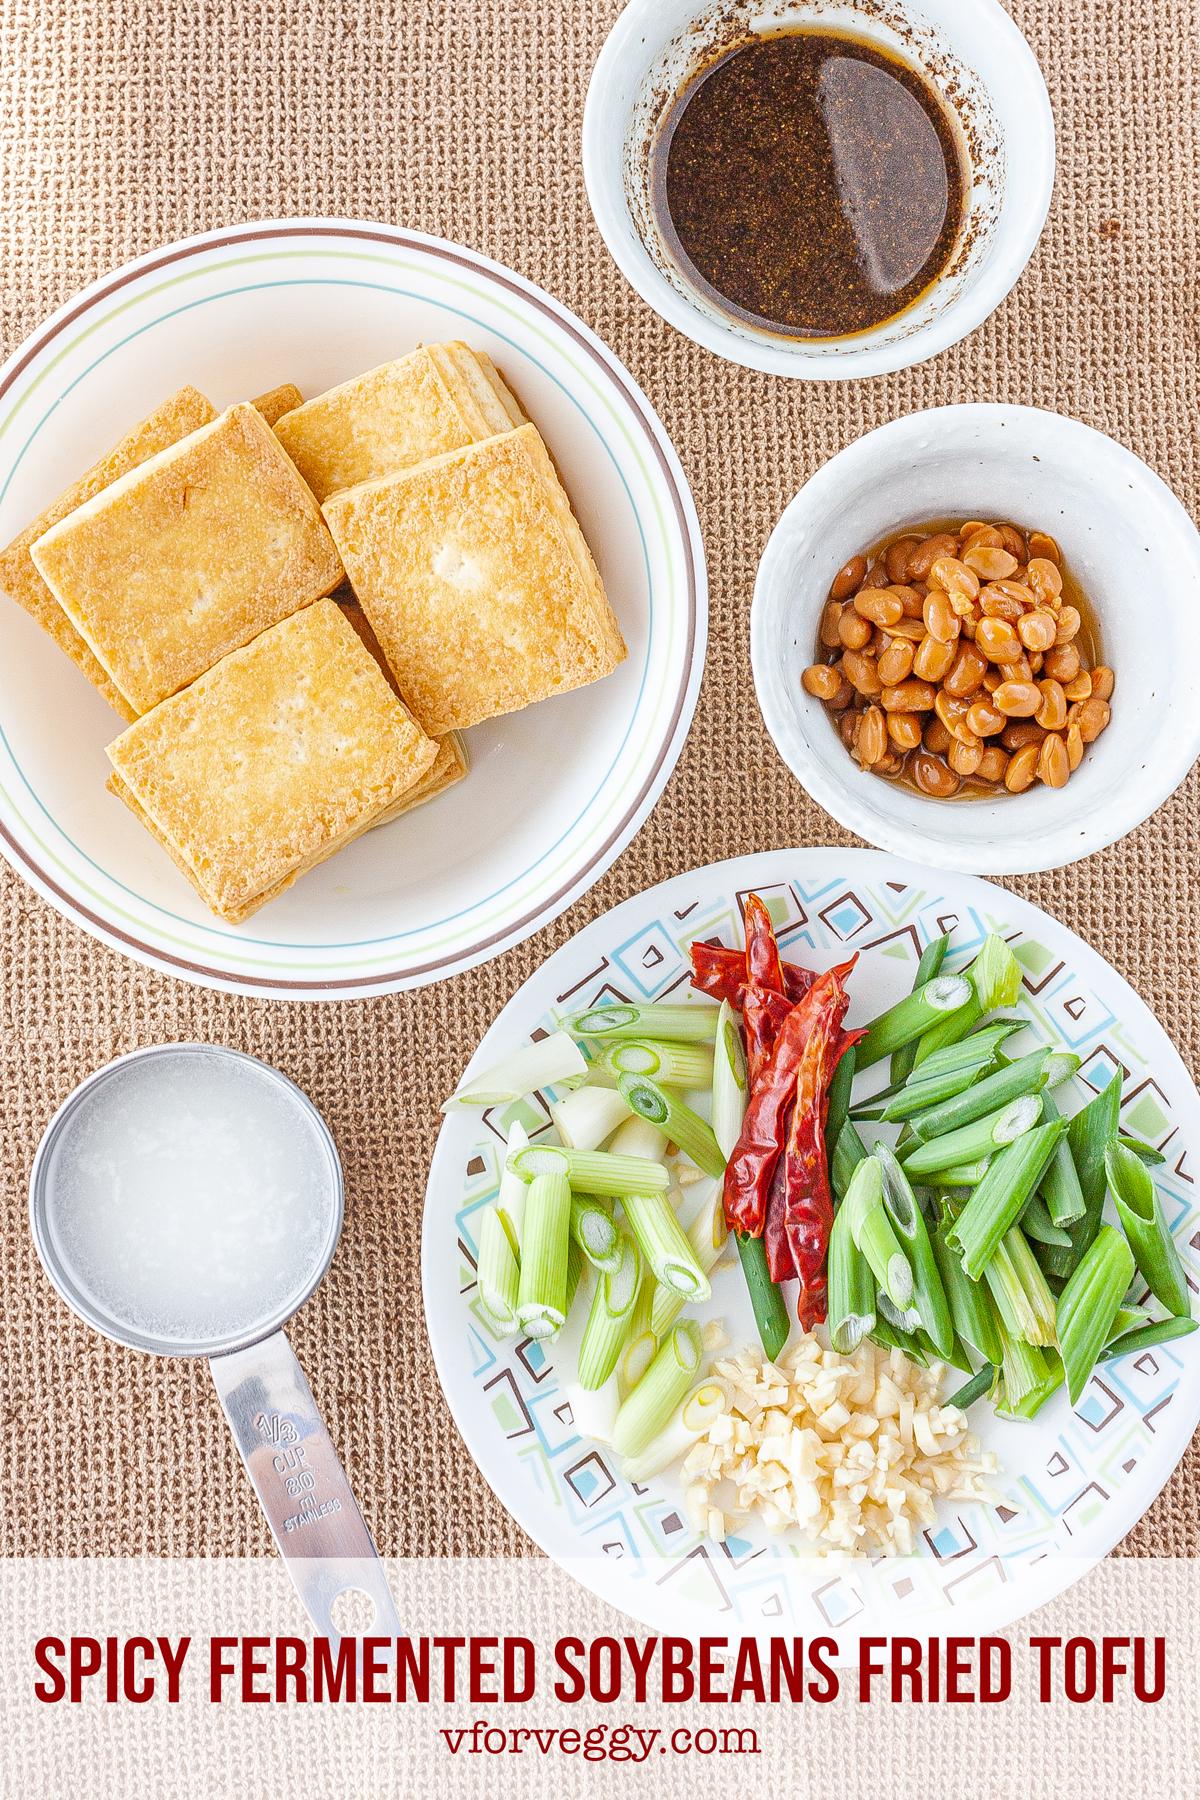 Spicy Fermented Soybeans Fried Tofu